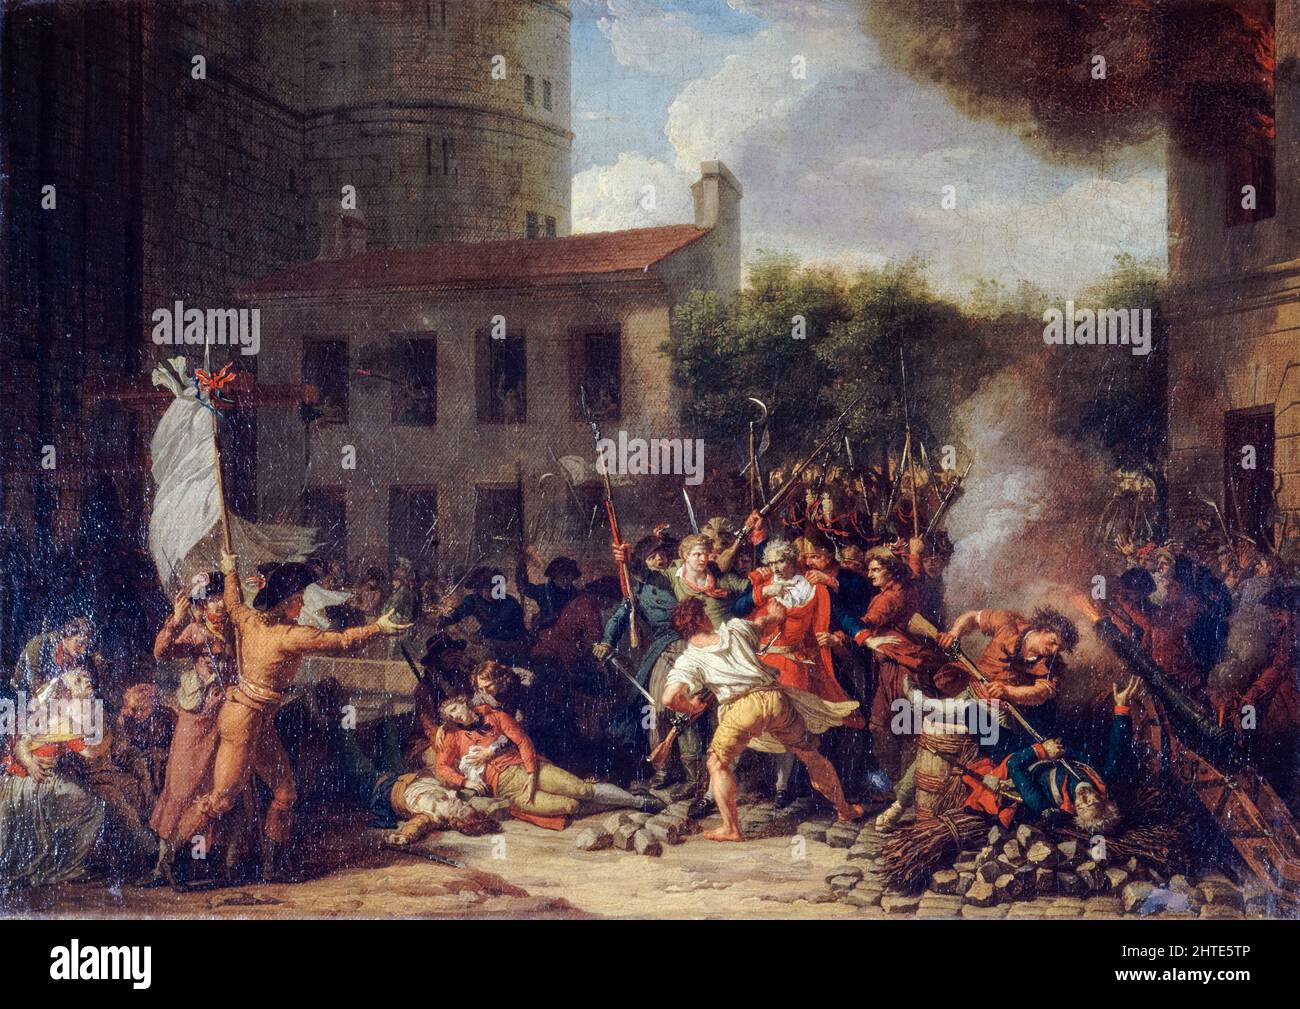 The Storming of the Bastille, July 14th 1789, the arrest of the Marquis de Launay, oil on canvas painting by Charles Thévenin, 1793 Stock Photo